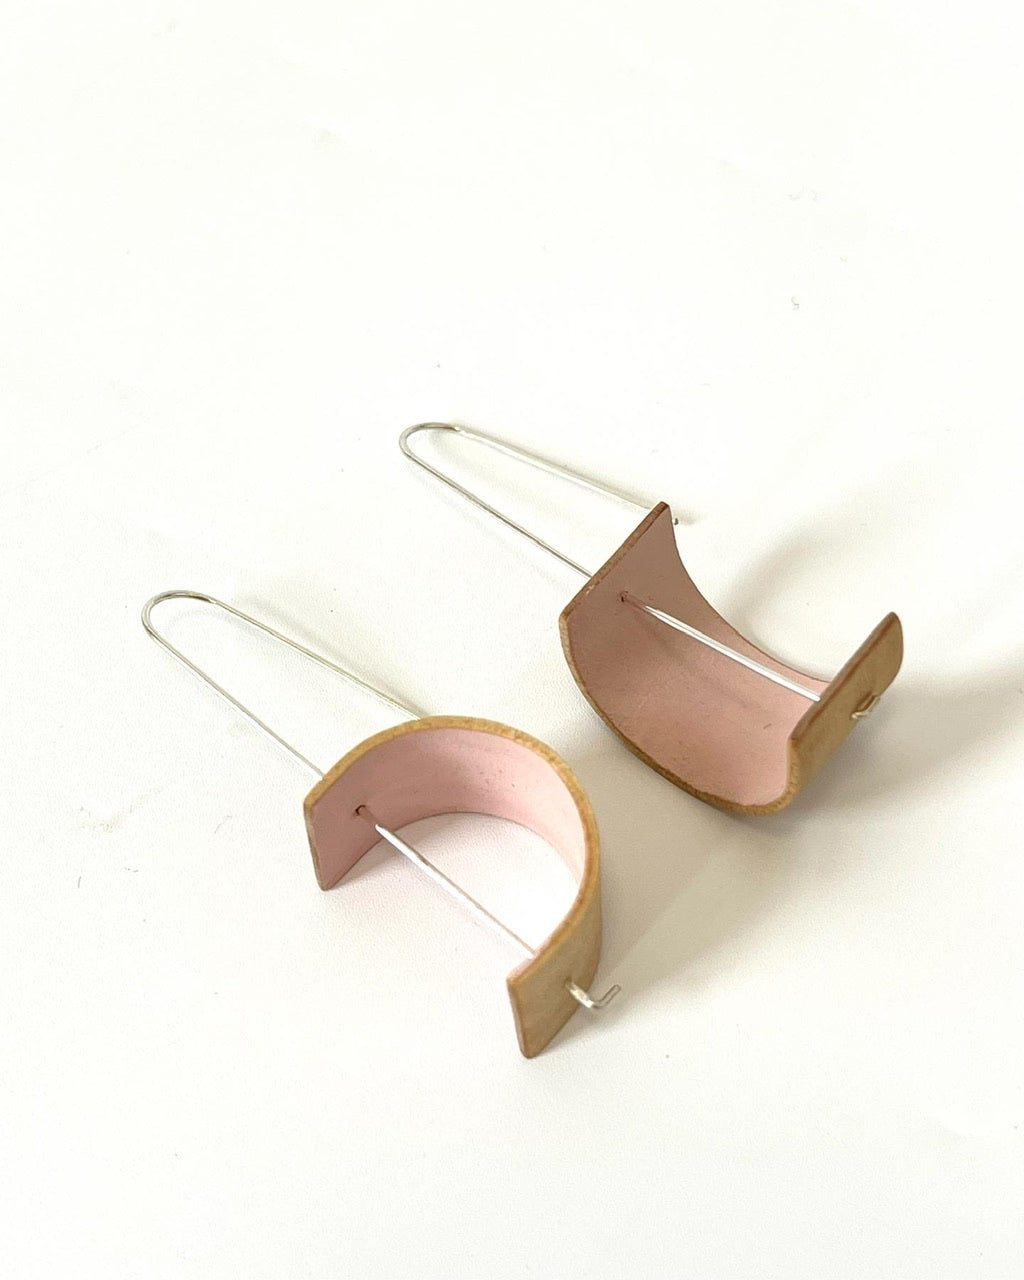 Bentwood Kauri Crescent Earrings - Soft Pink